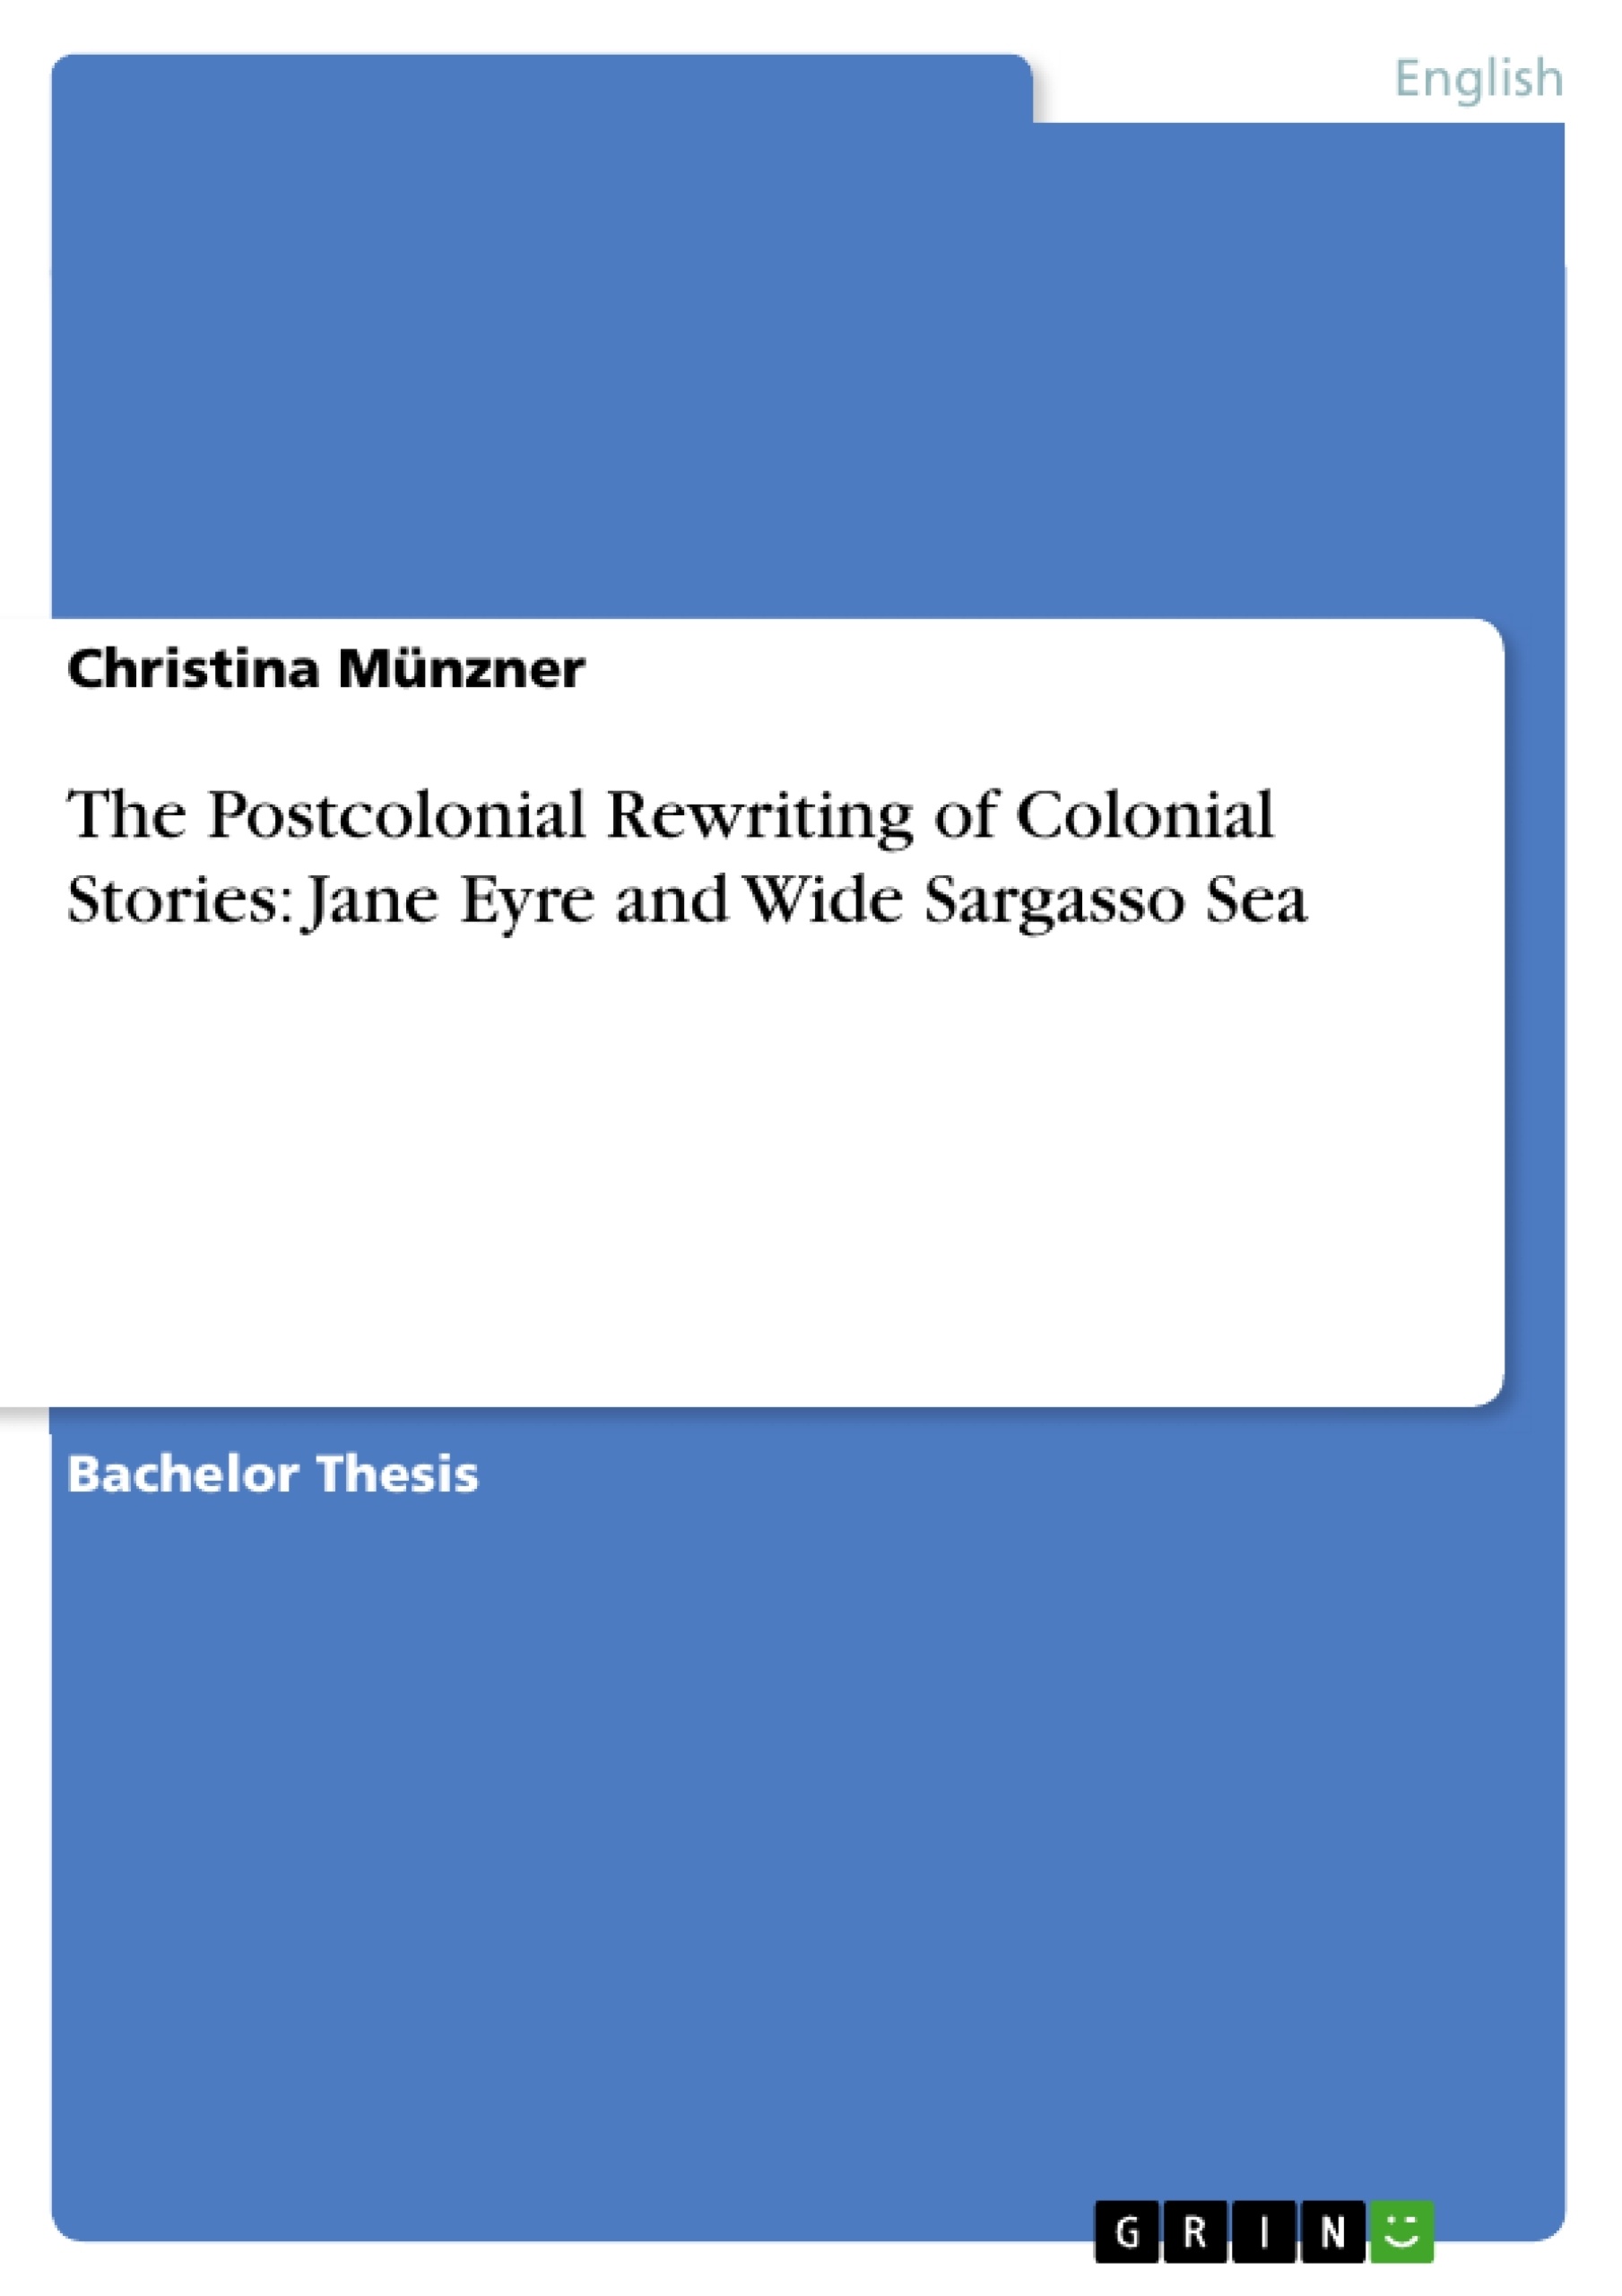 Title: The Postcolonial Rewriting of Colonial Stories: Jane Eyre and Wide Sargasso Sea